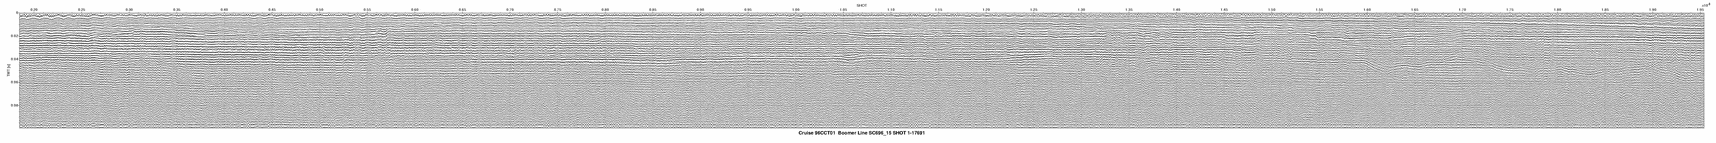 SC696_15 seismic profile thumbnail image with link to full size image